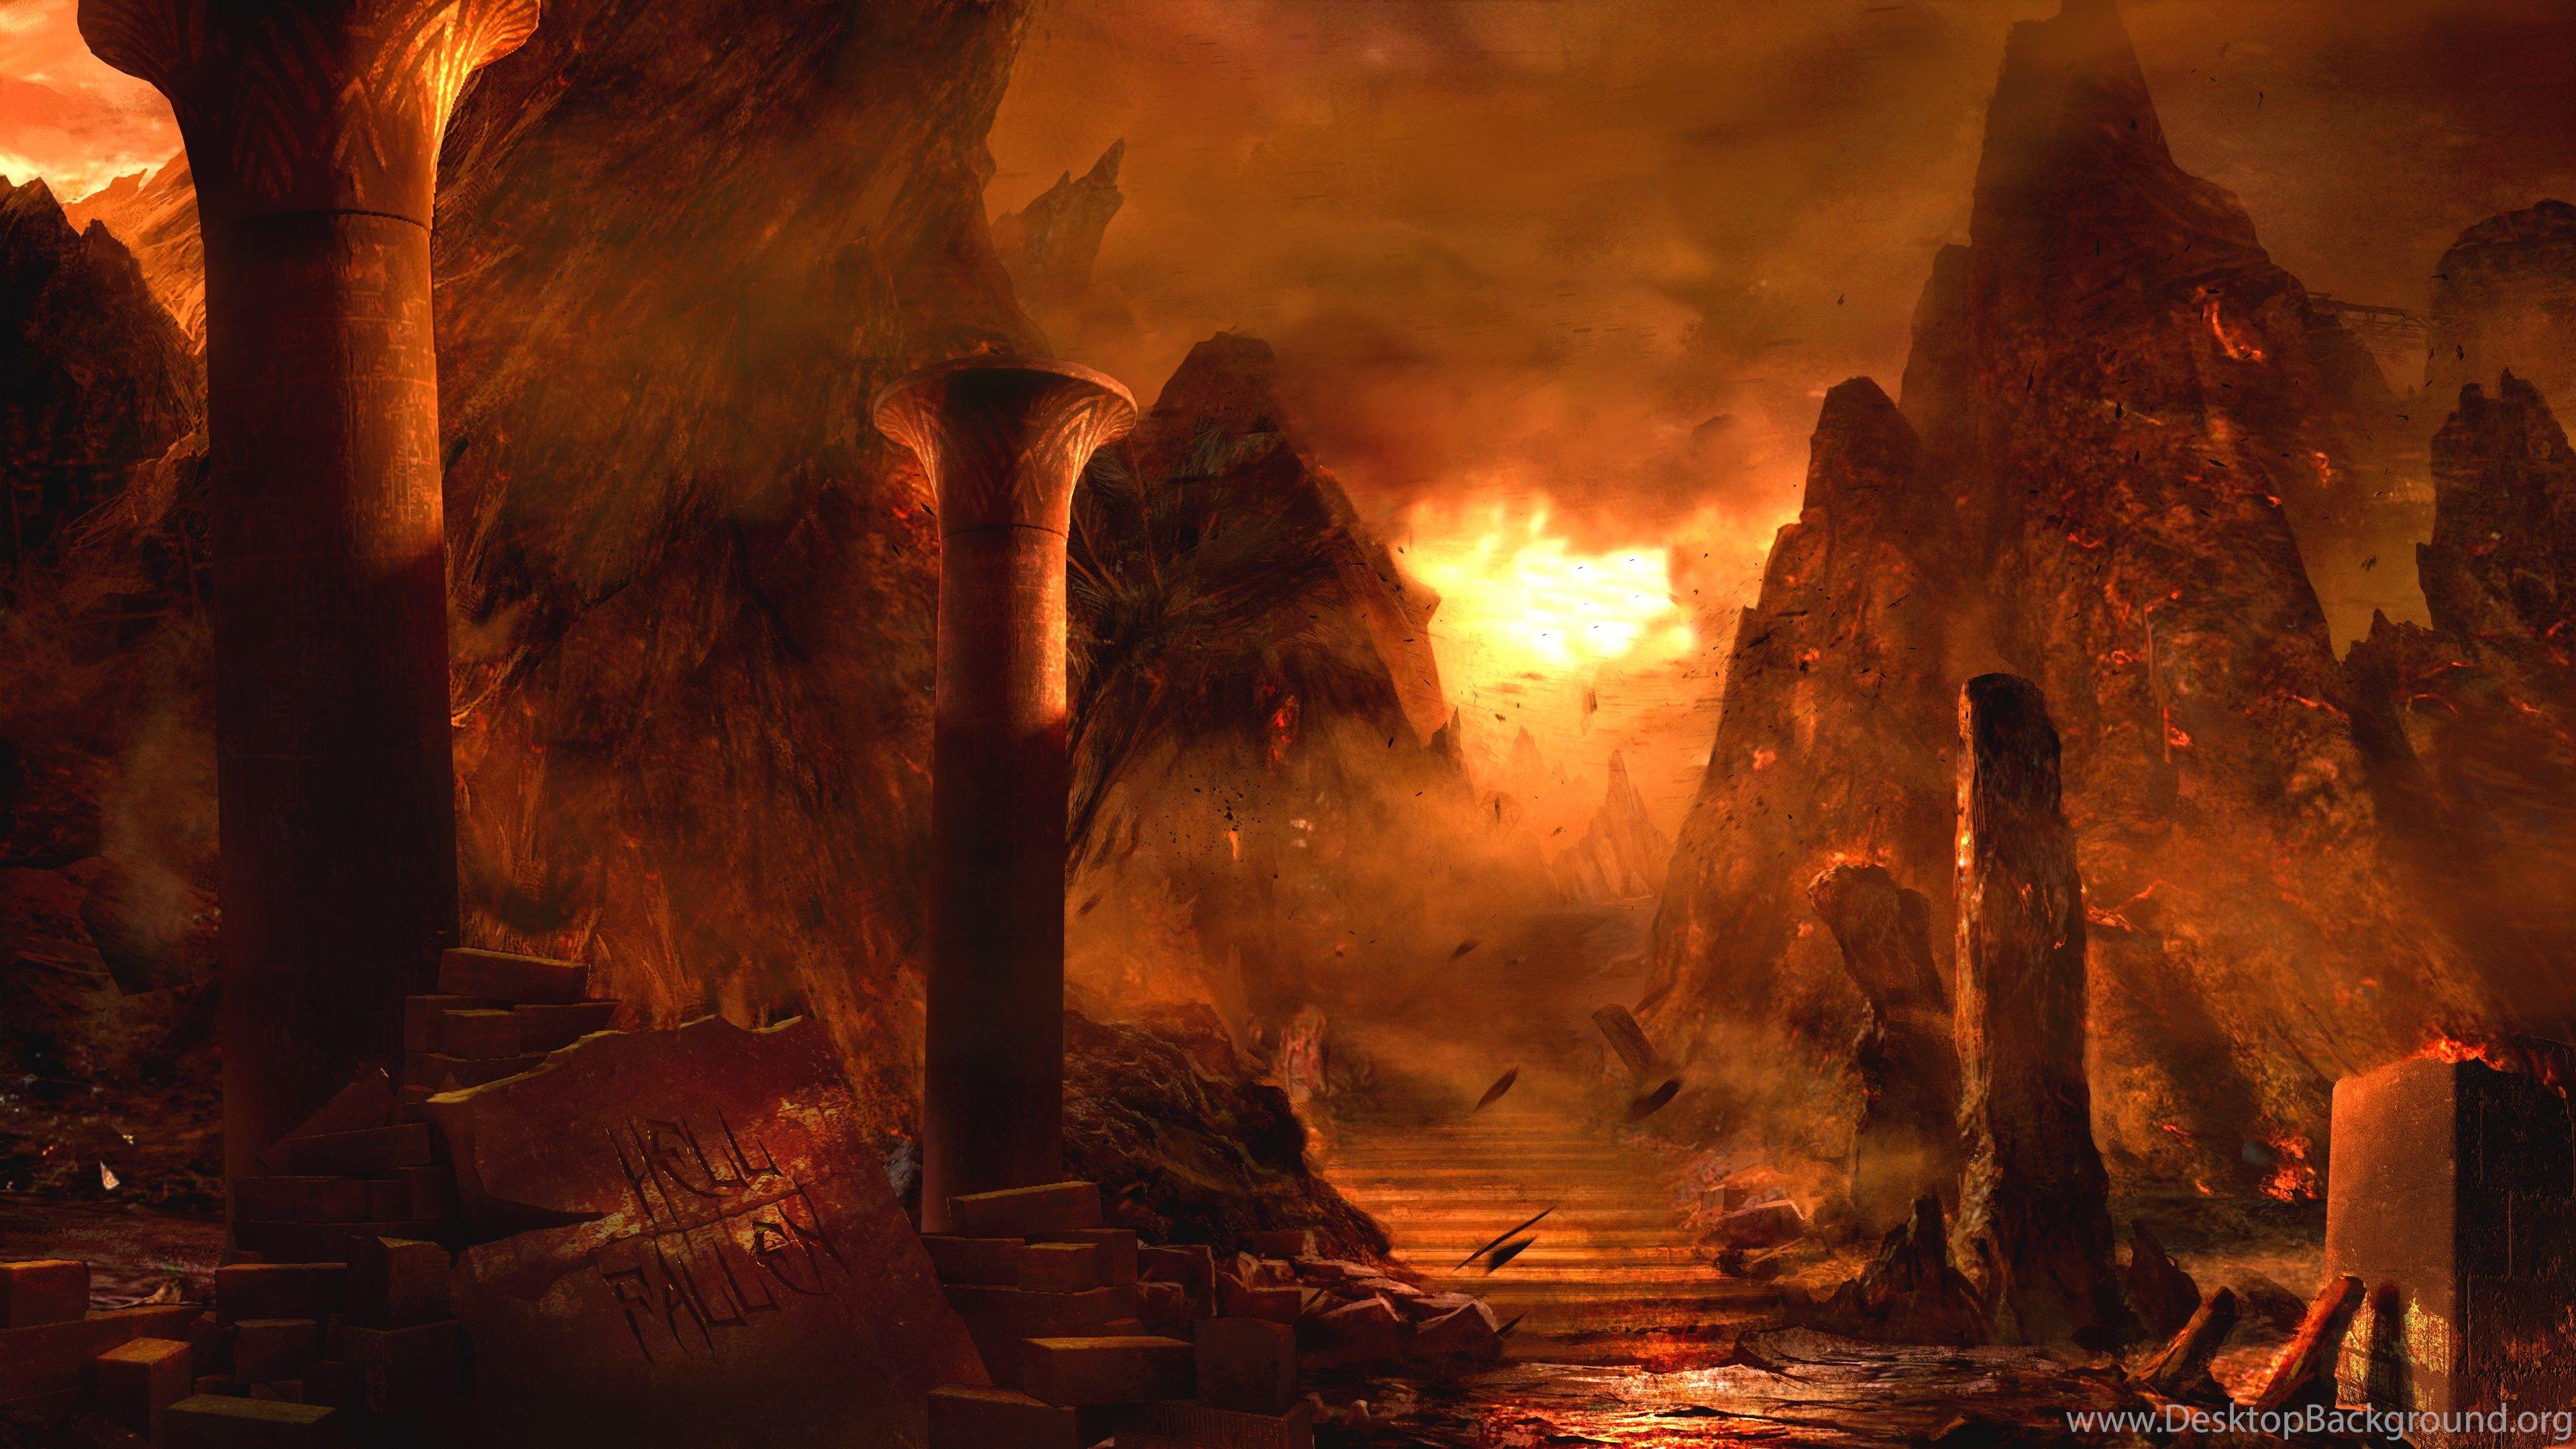 hell backgrounds